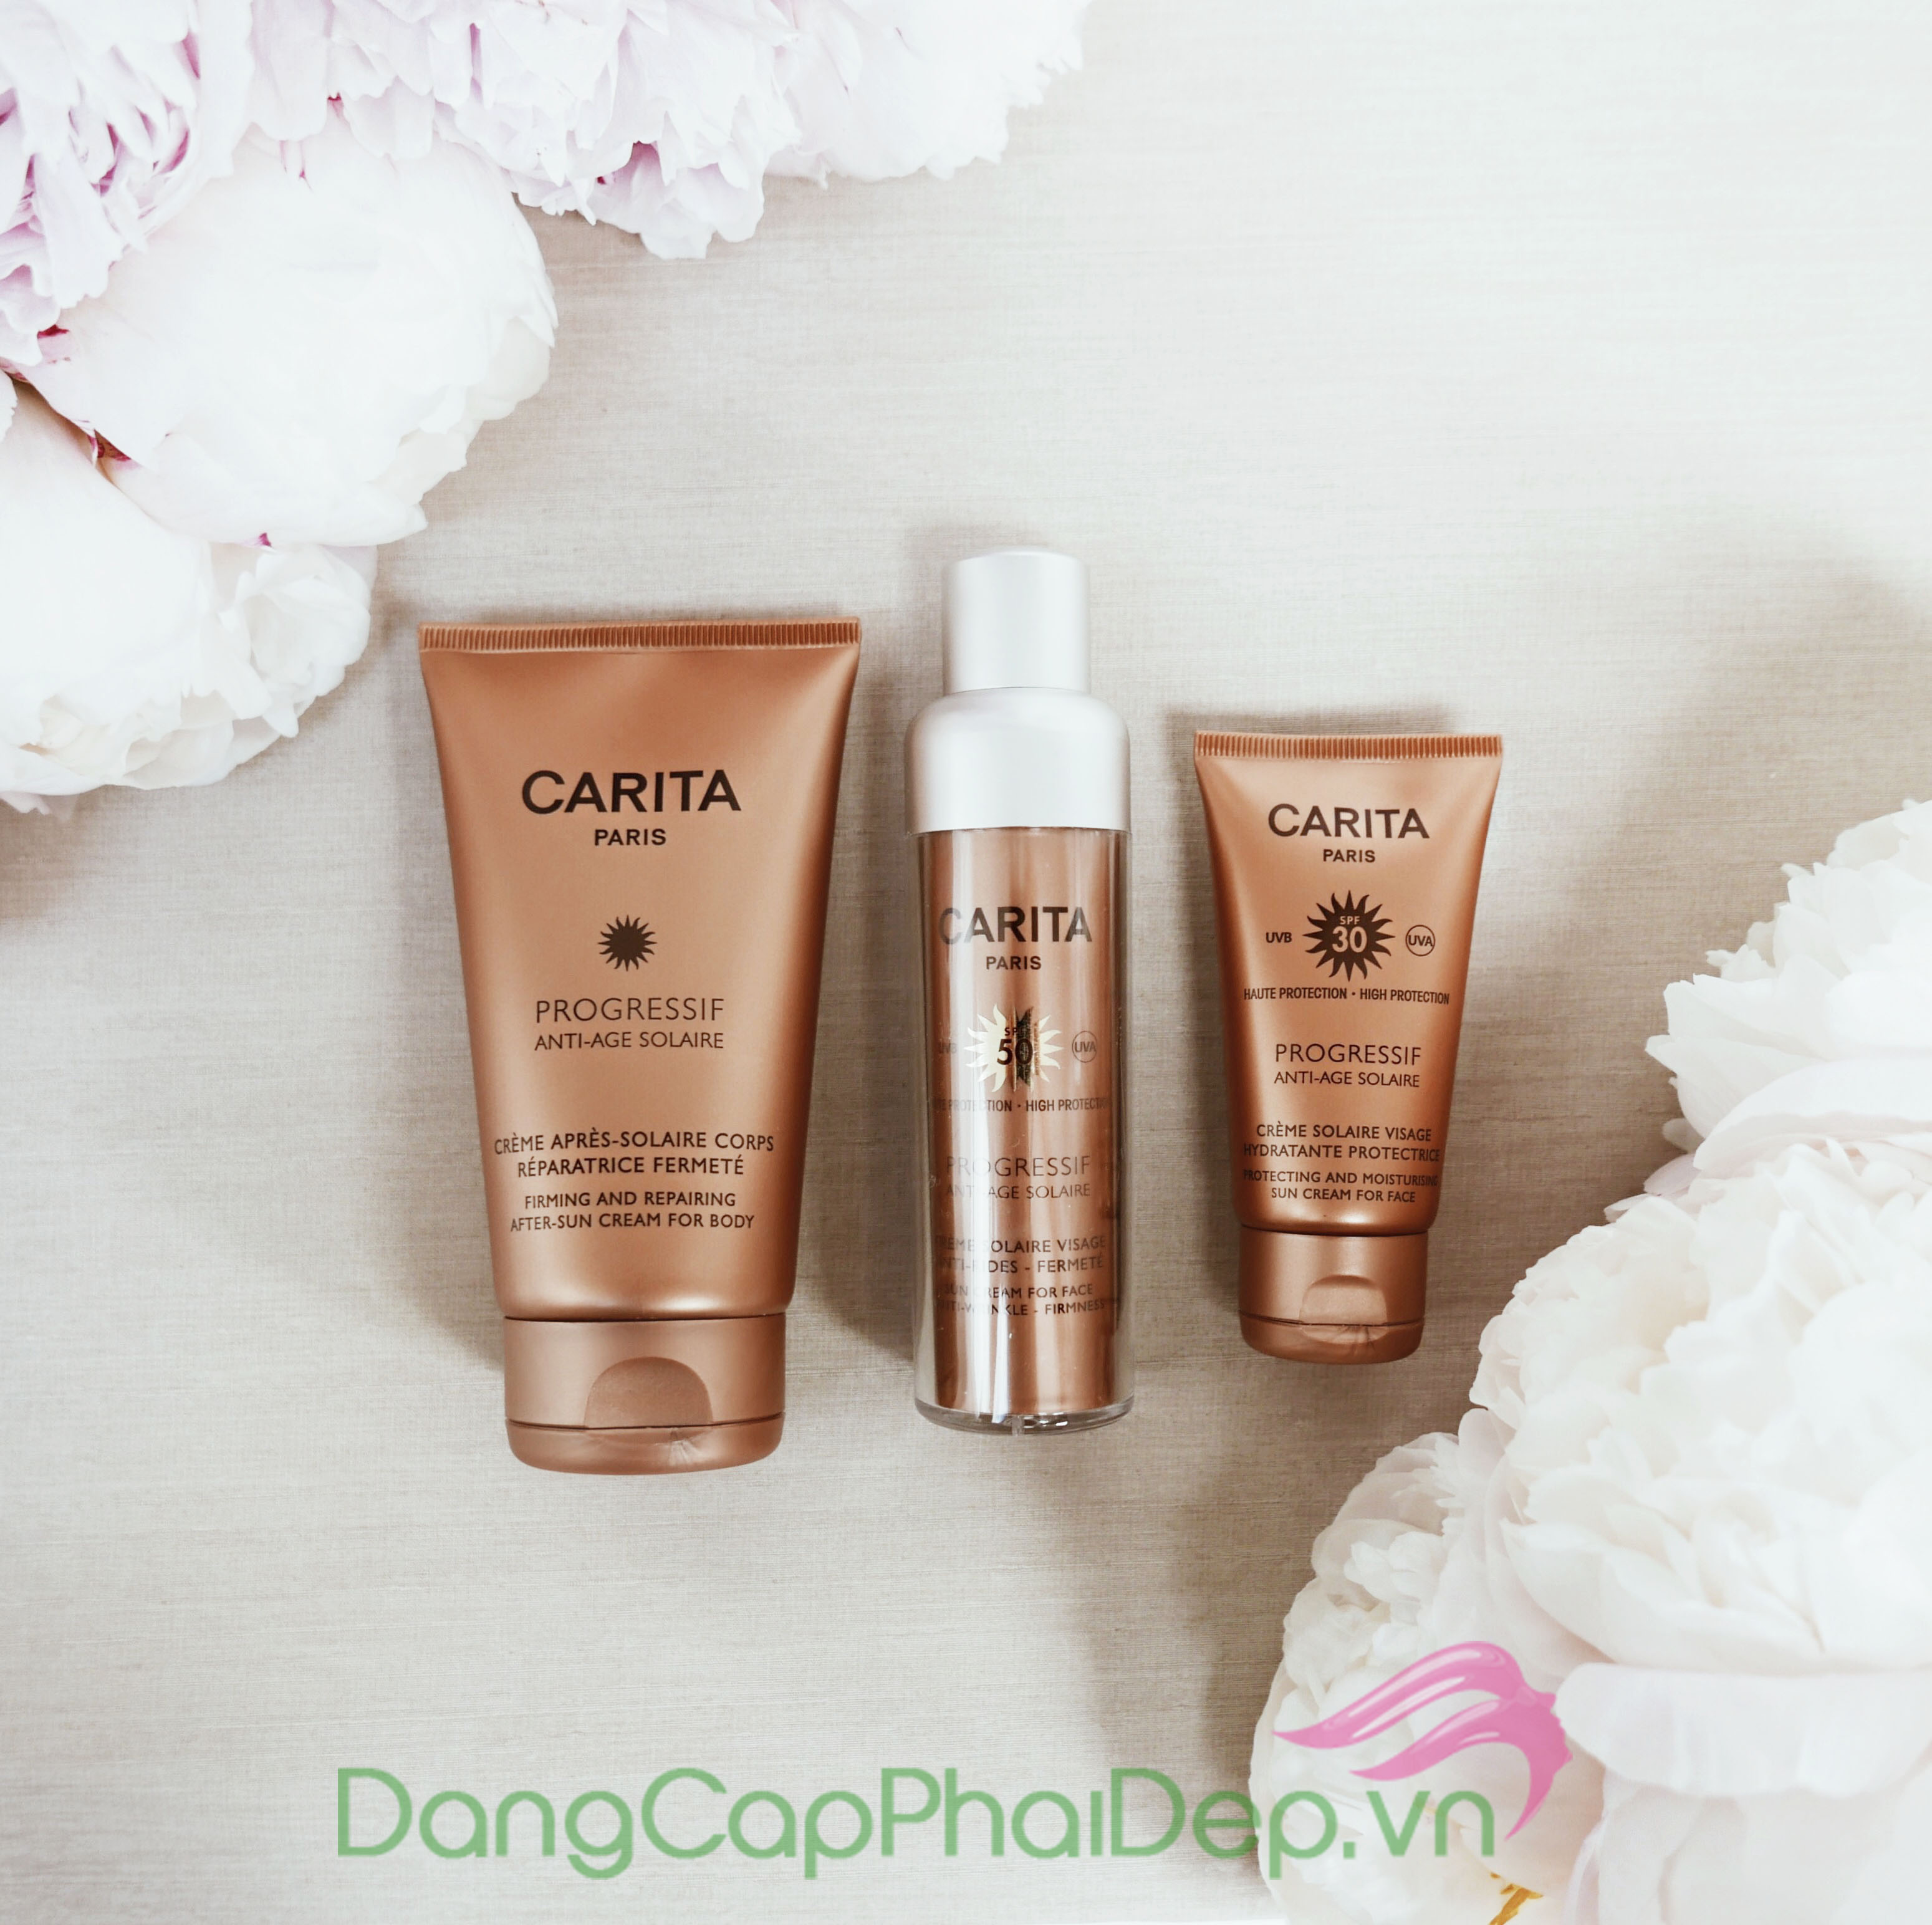 Carita Progressif Anti-Age Solaire Face Kem chống nắng SPF 30